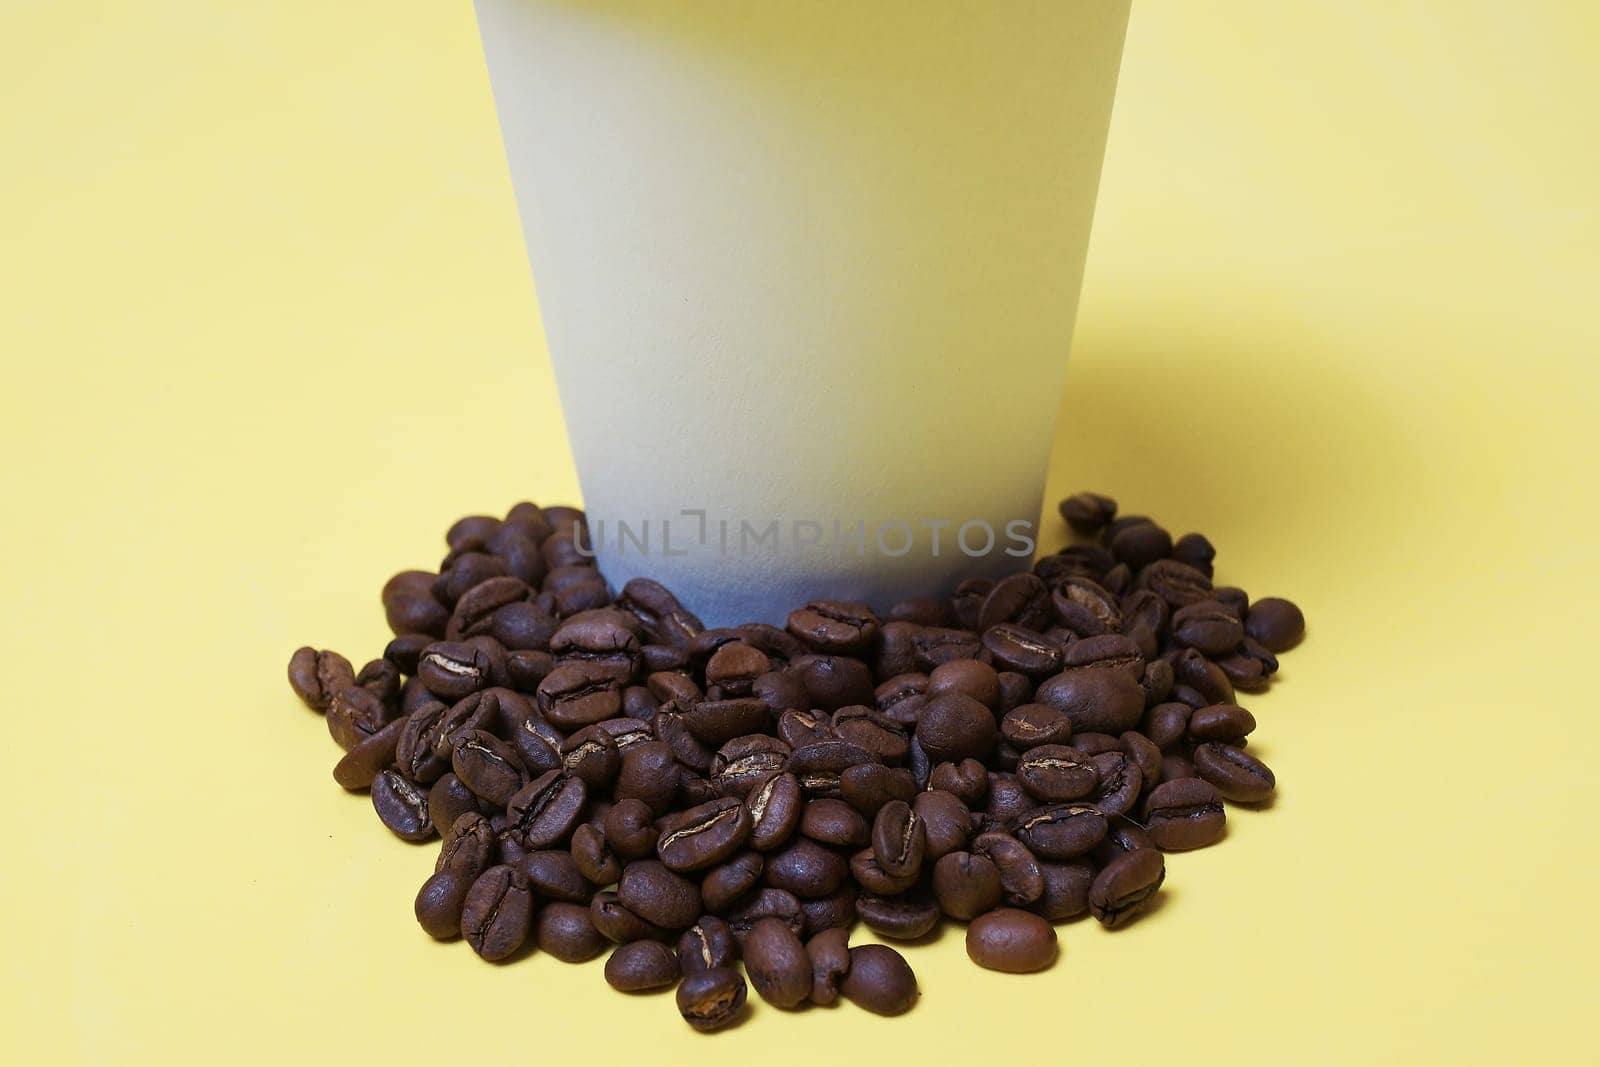 coffee beans next to a paper cup on a white-yellow background by Севостьянов